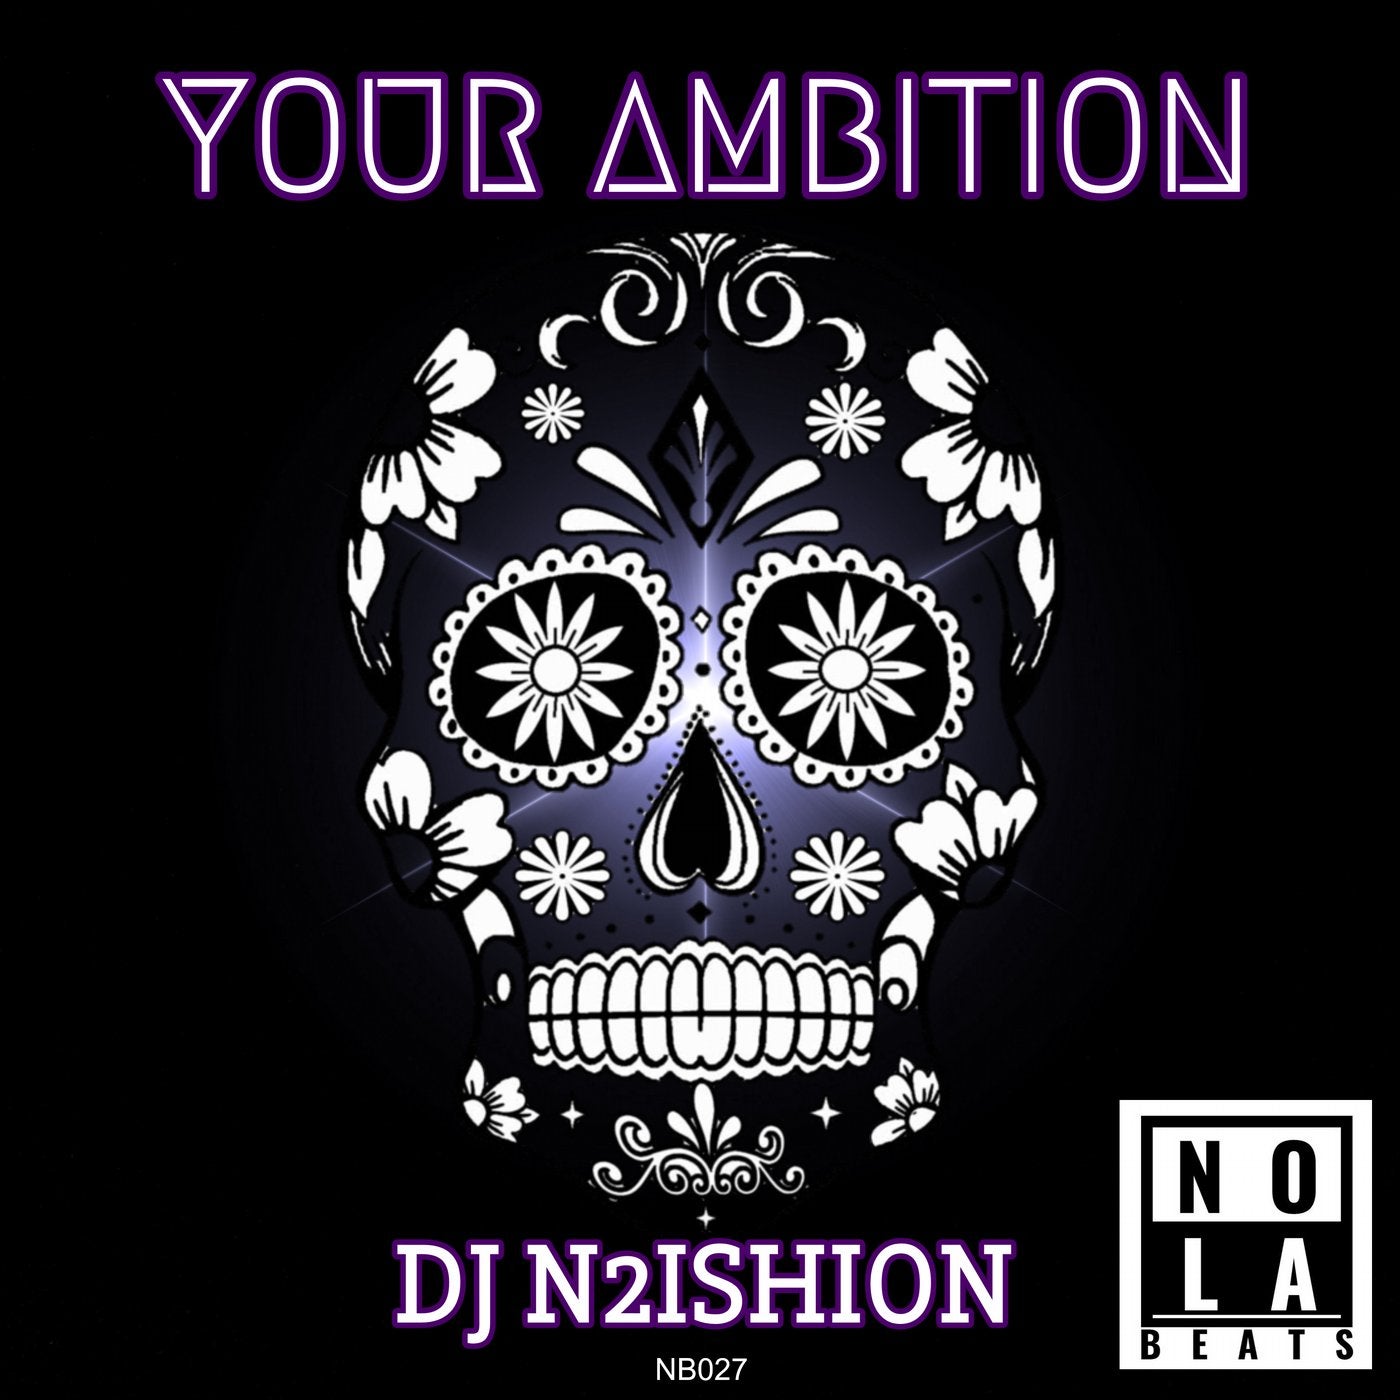 YOUR AMBITION